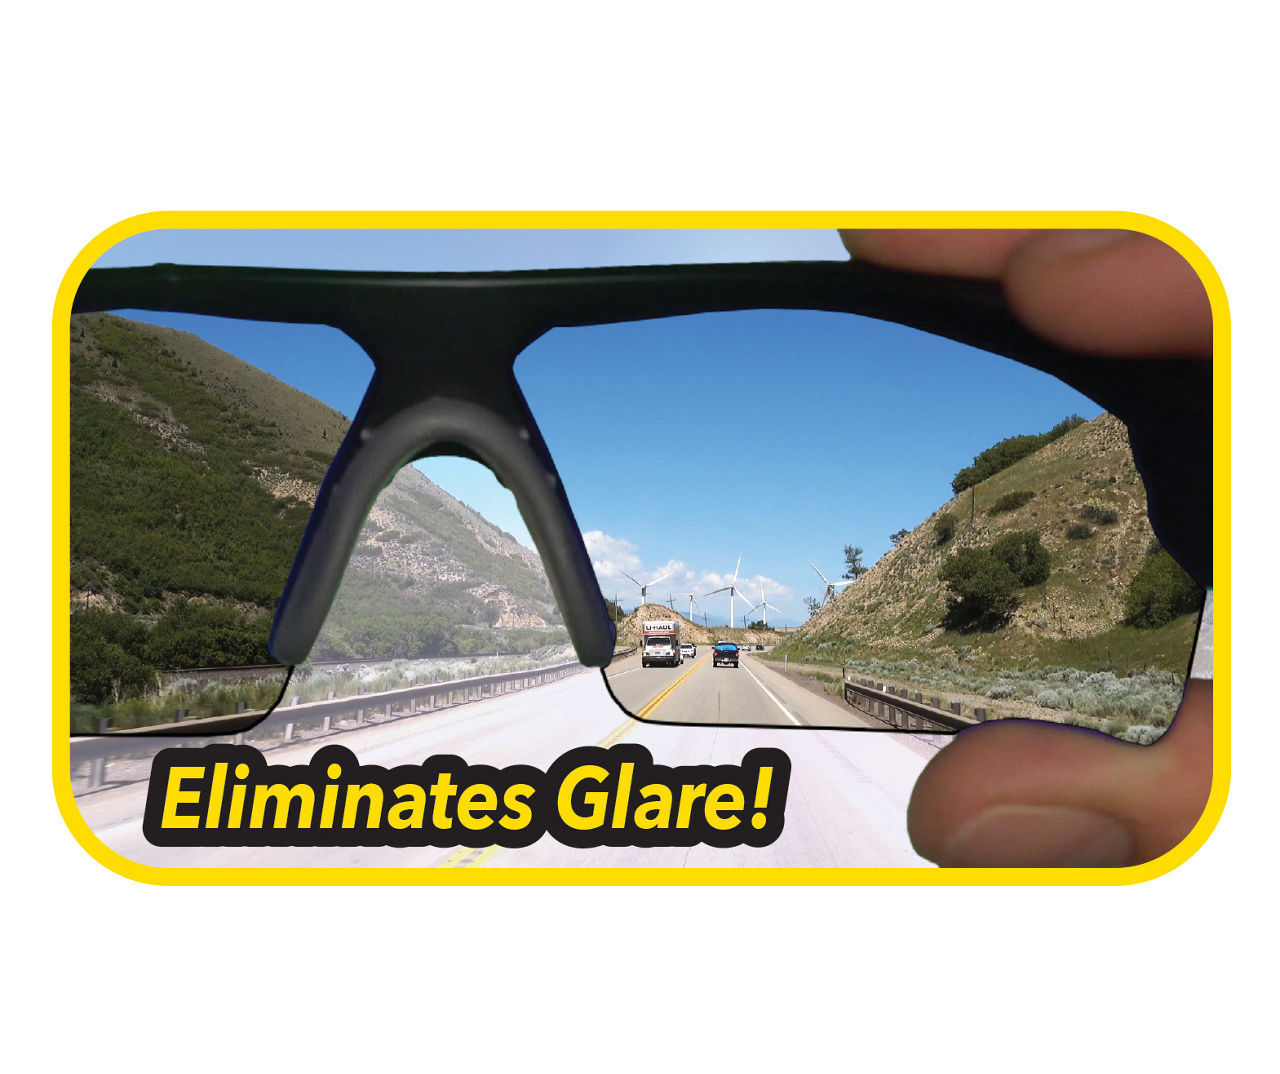 See in HD & #DriveSafe with Battle Vision HD Polarized Sunglasses